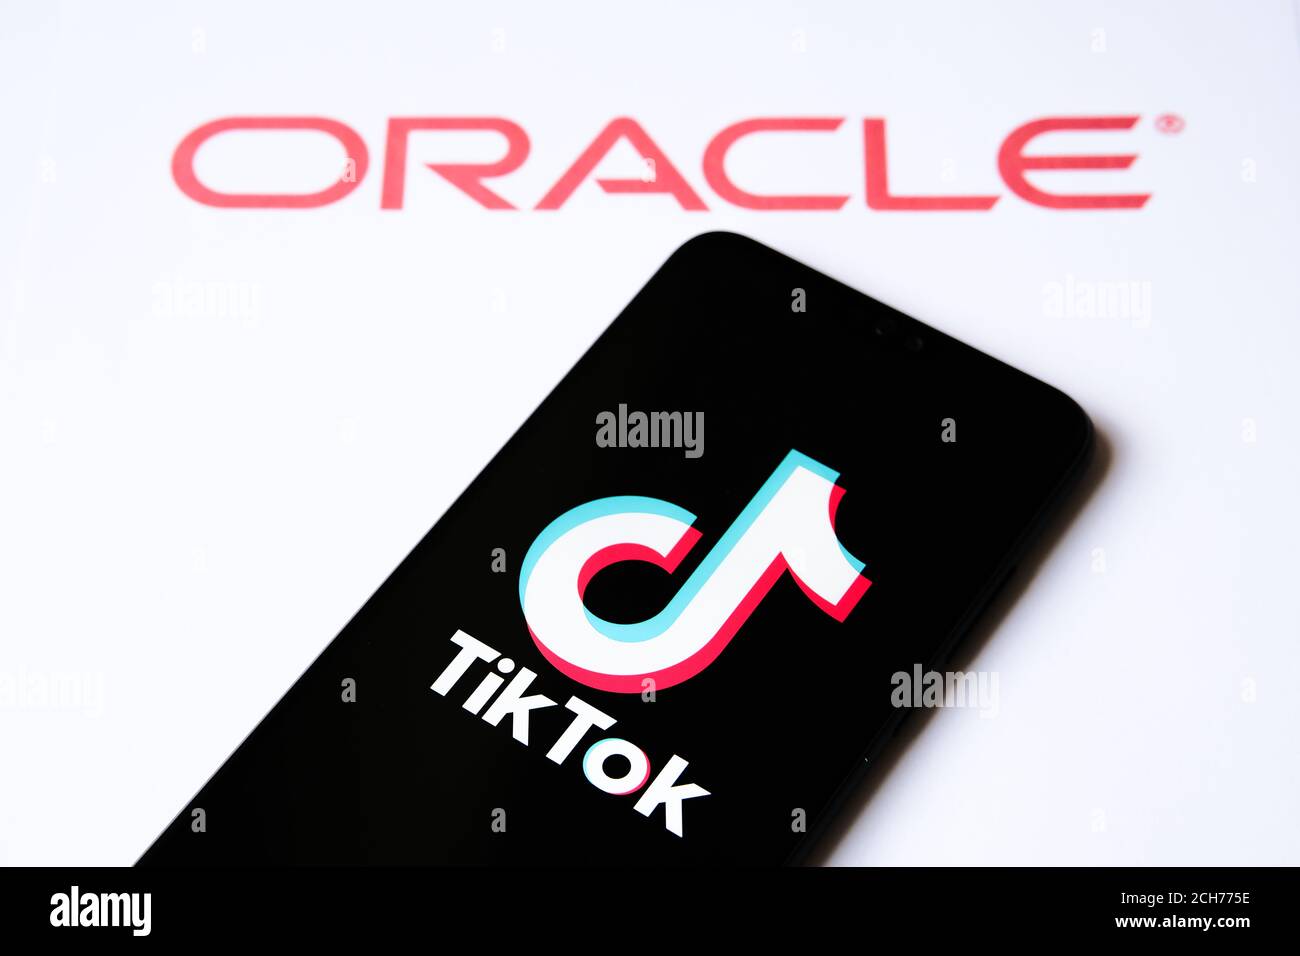 TikTok and Oracle partnership concept photo. TikTok logo seen on the smartphone and Oracle company logo seen on the blurred background. Stock Photo